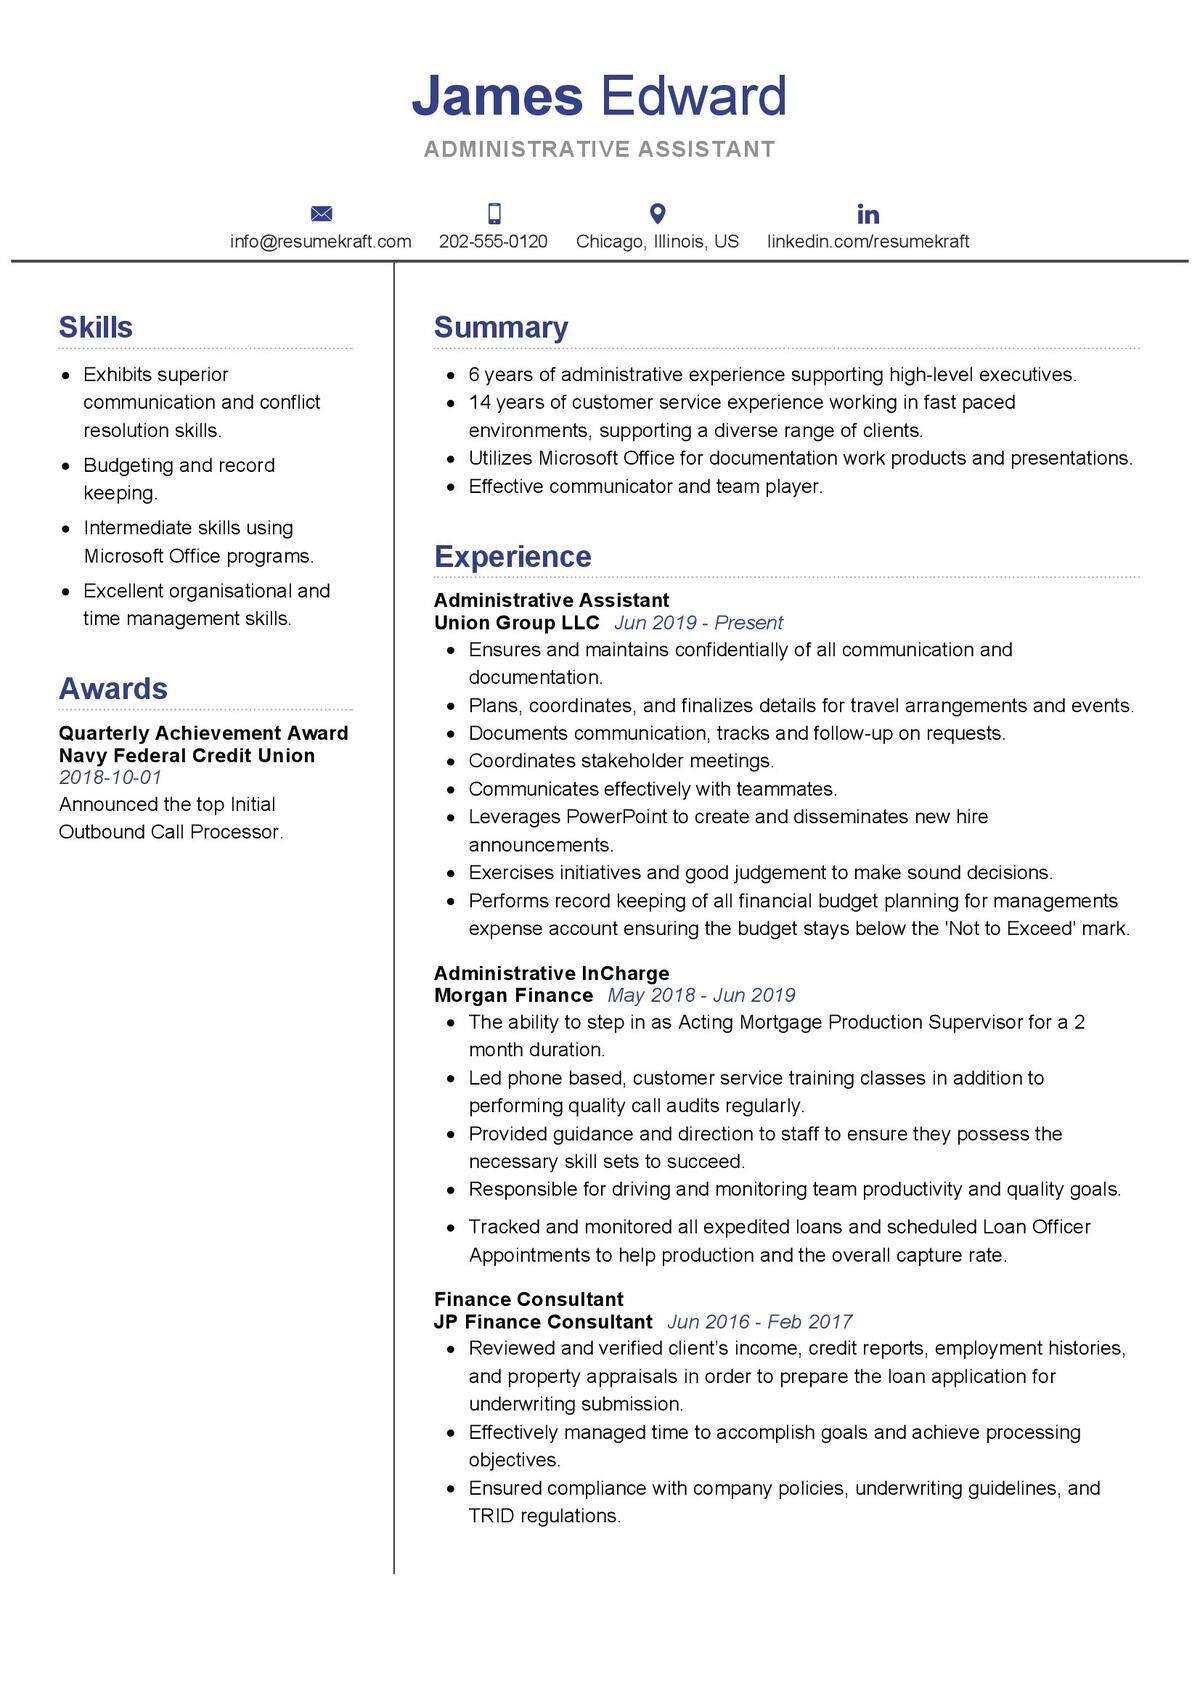 Sample Resume Objective Statements for Administrative assistant Administrative assistant Resume Sample 2021 Writing Guide …